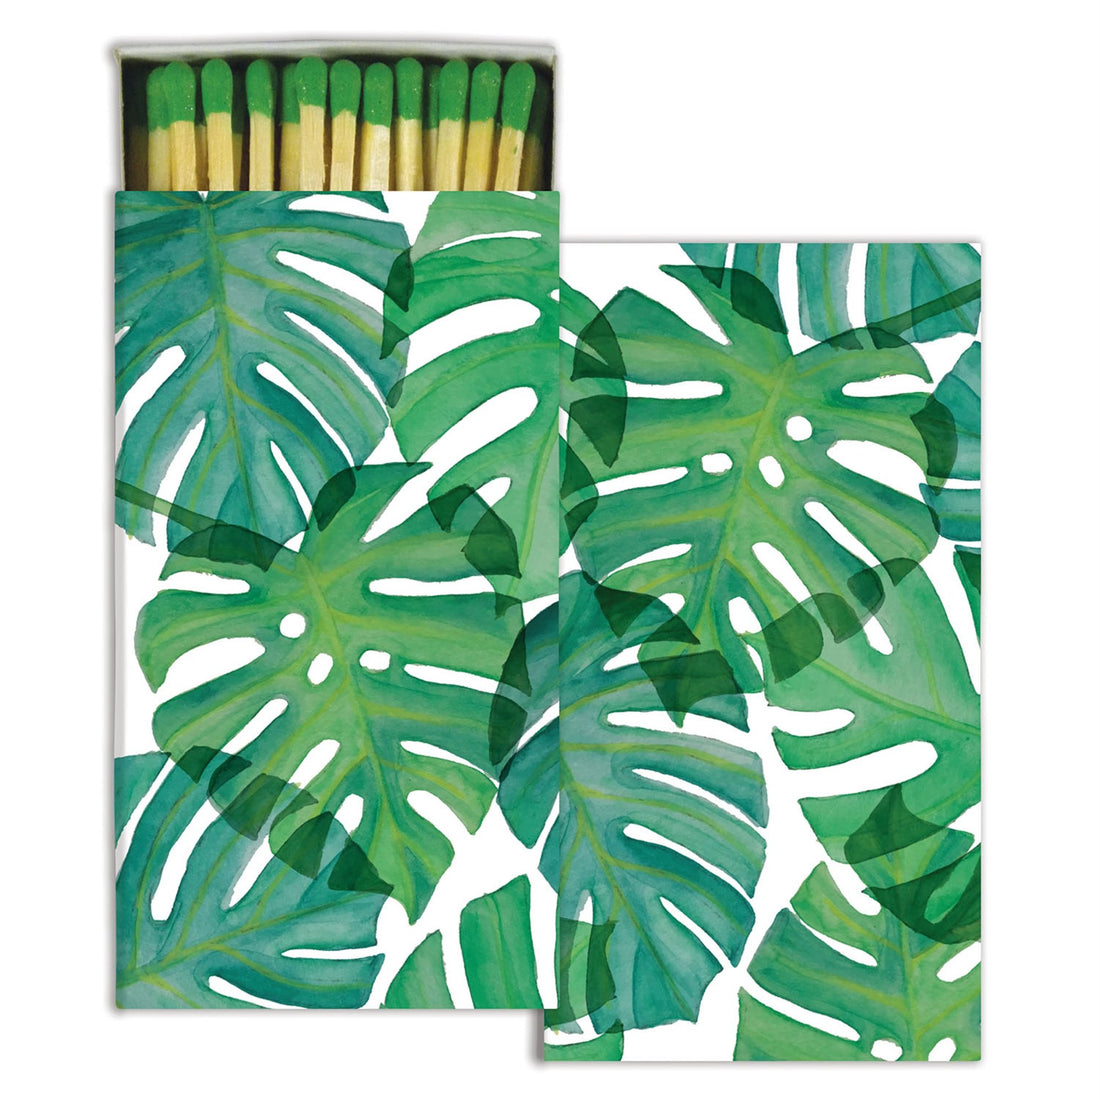 Illustrated HomArt Tropical Matches matchbox cover featuring tropical birds and palm trees.